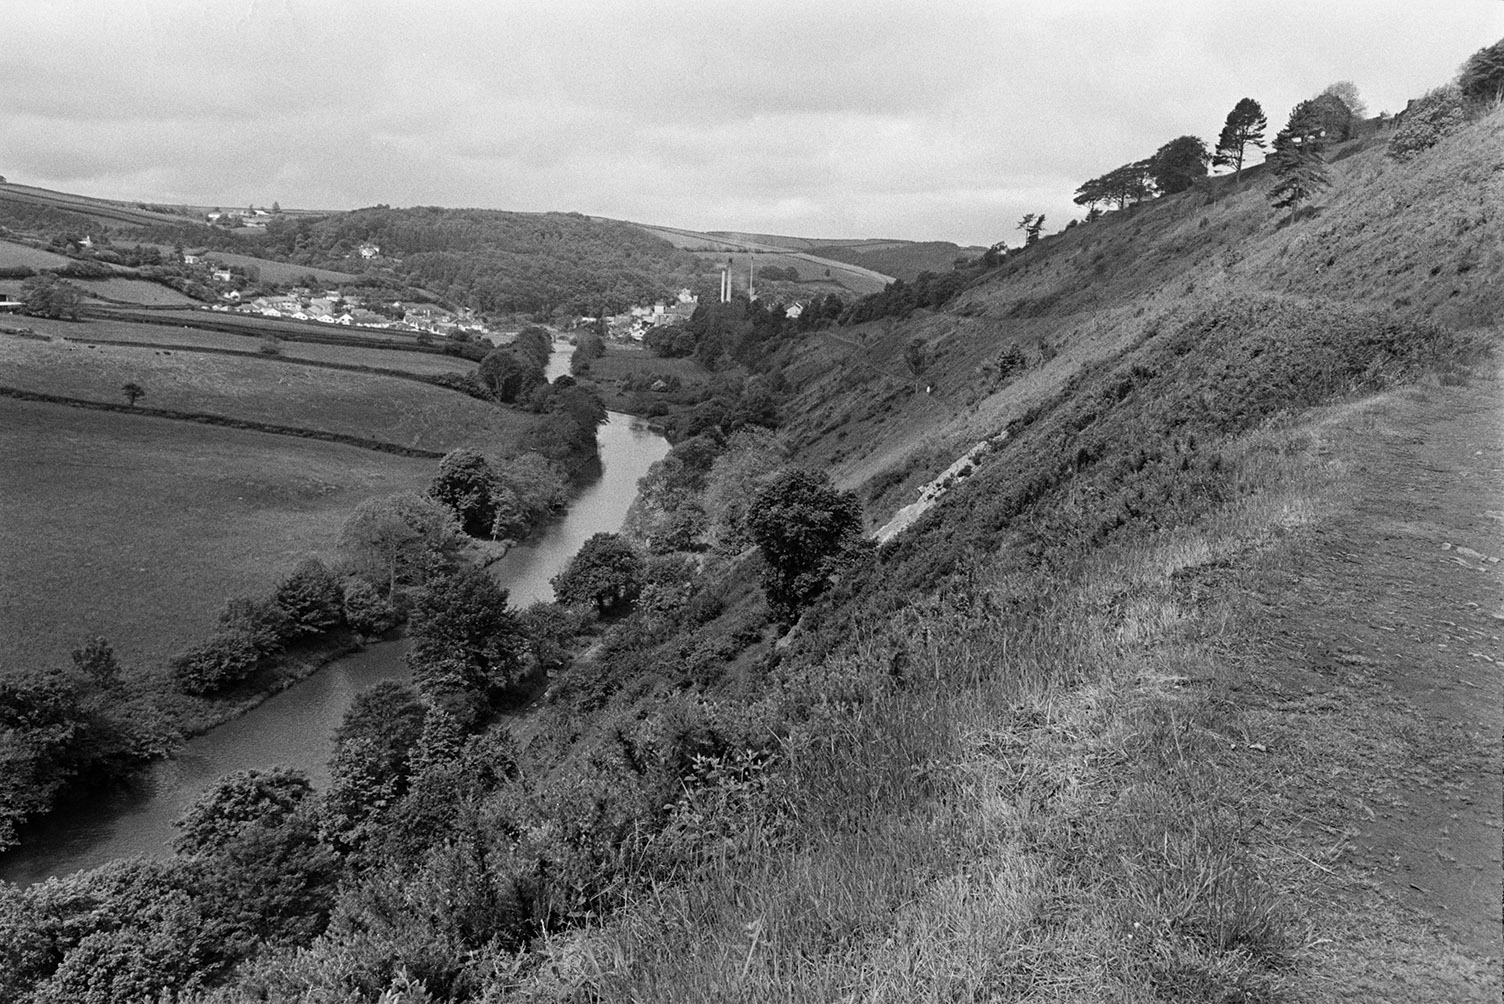 A view of the River Torridge running along the bottom of a valley and a village in the distance. The image is taken from Torrington.